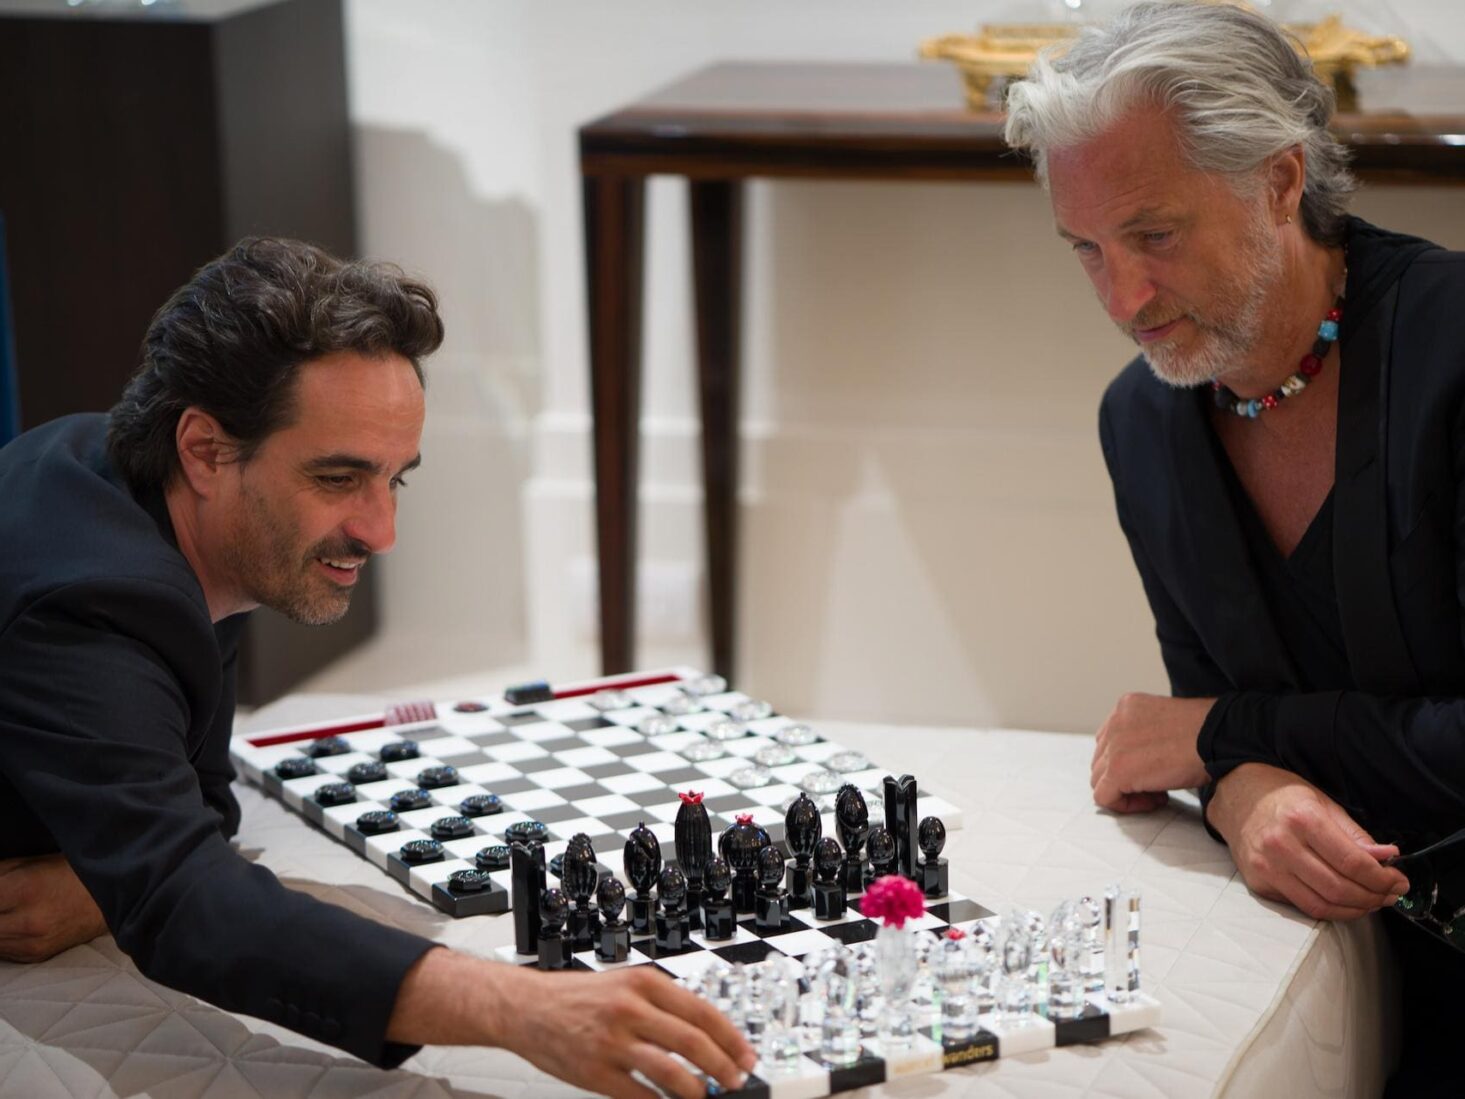 Marcel Wanders Won The European Product Design Award With The Amazing